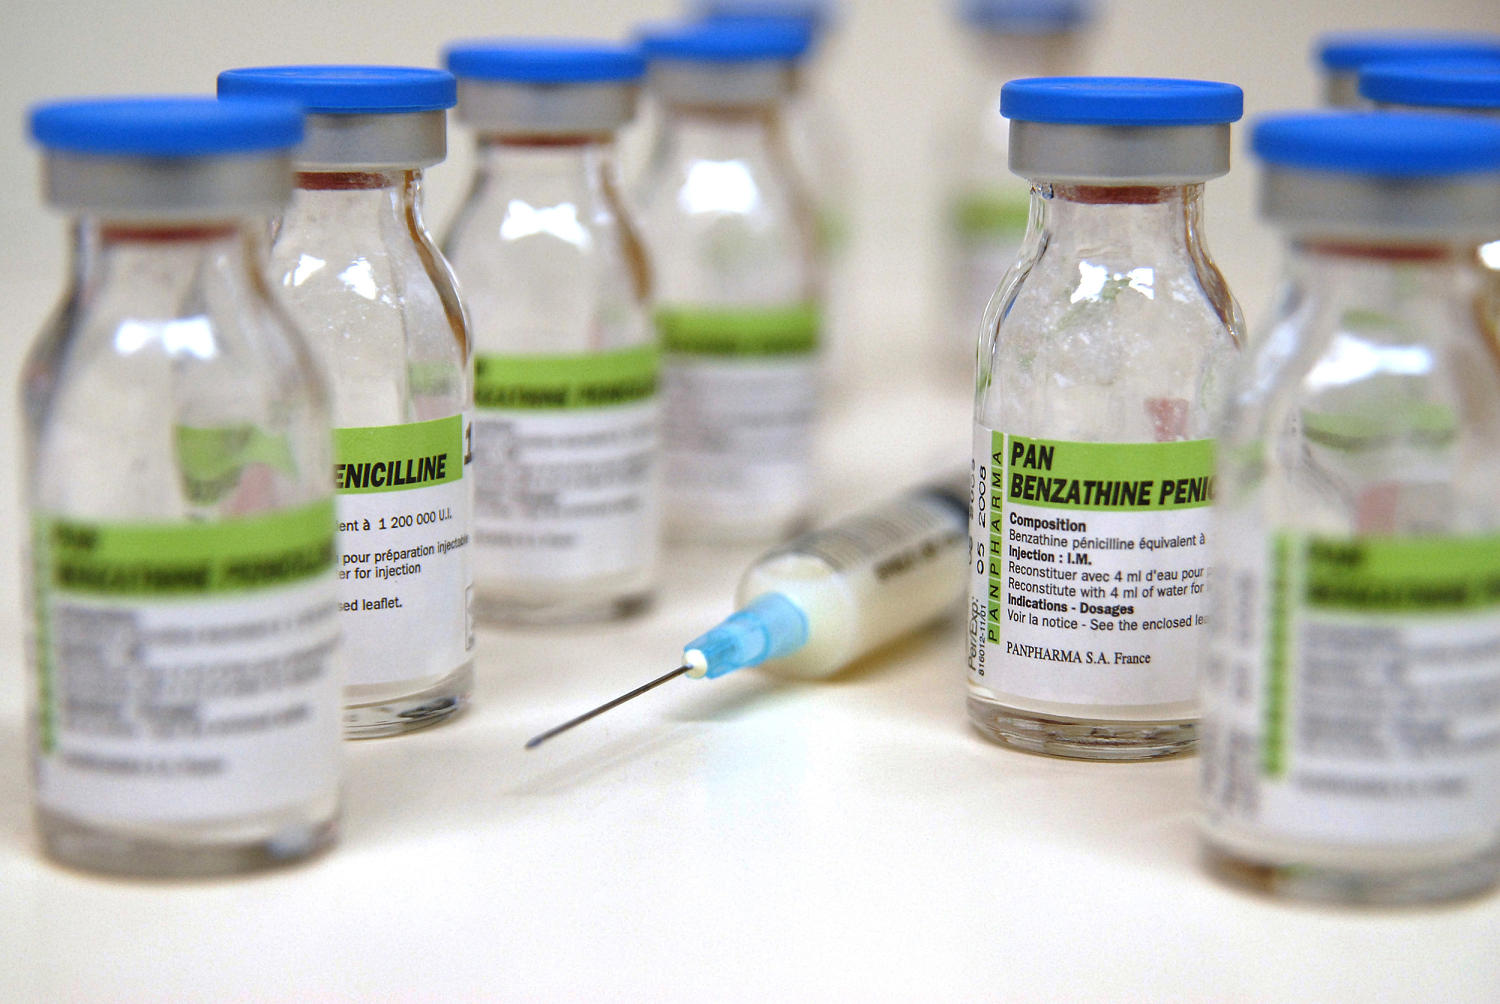 Most people aren't really allergic to penicillin. More doctors are doing tests to confirm it. 